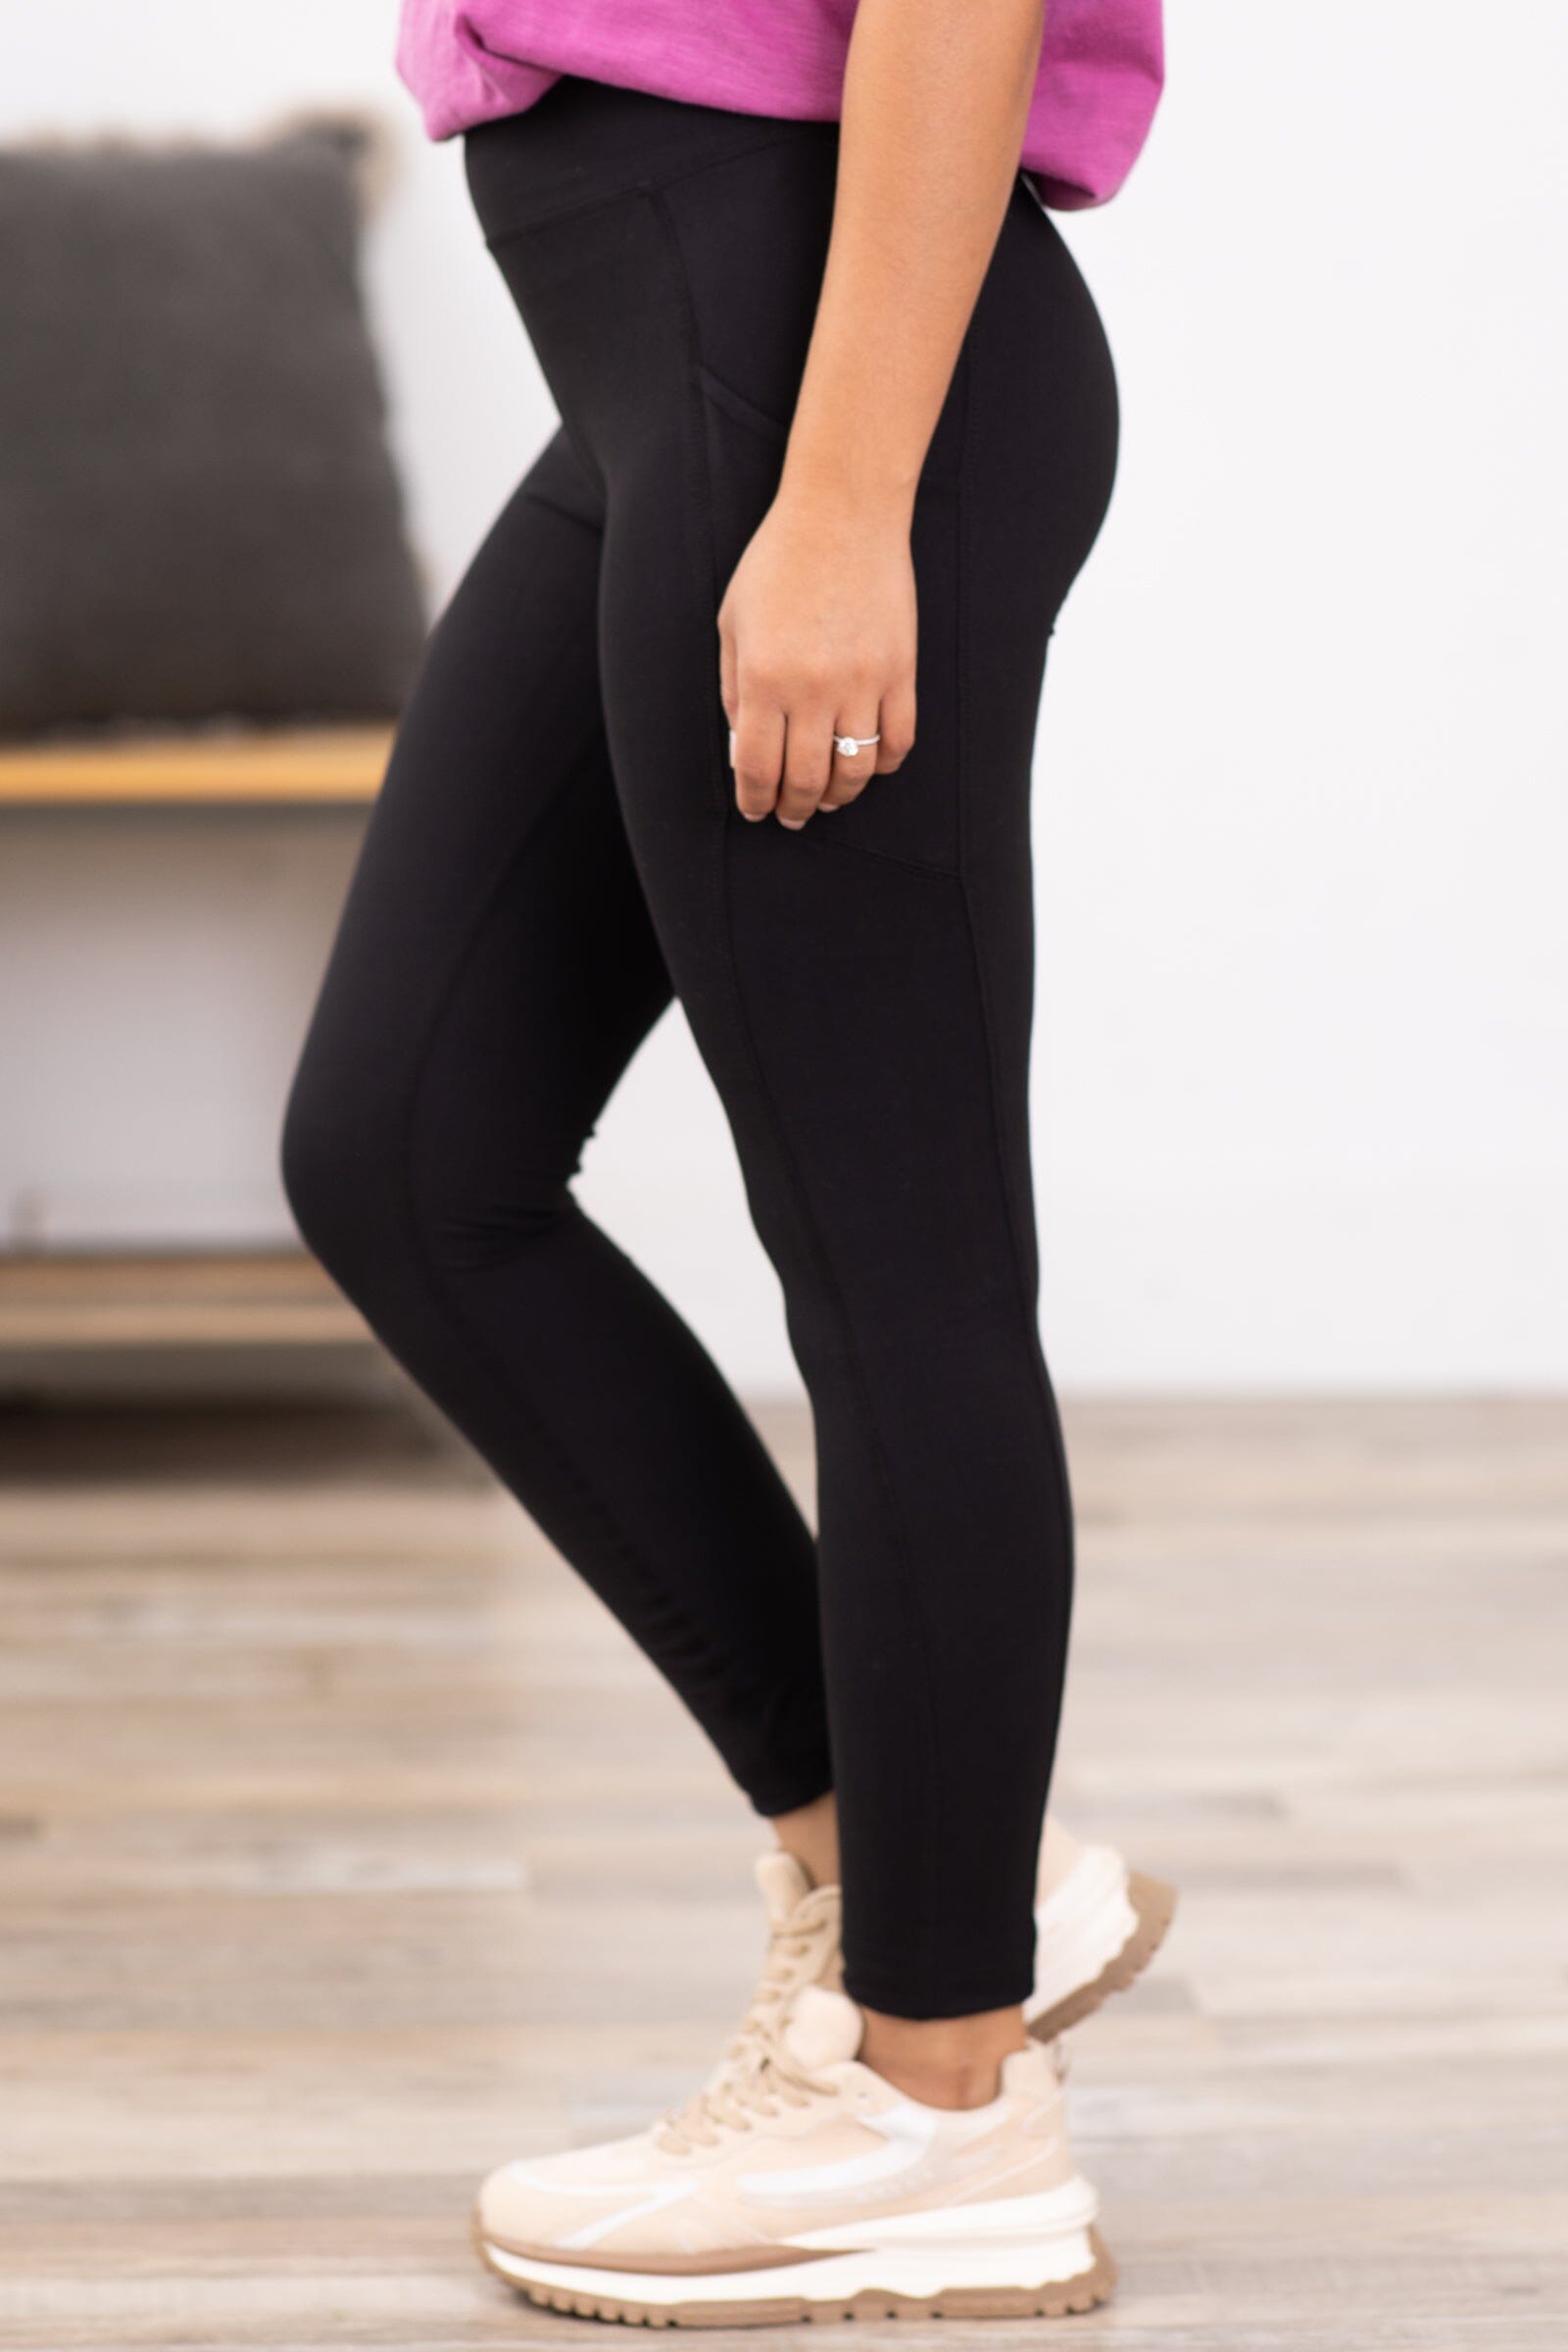 Black Buttery Soft Leggings With Side Pocket - Filly Flair